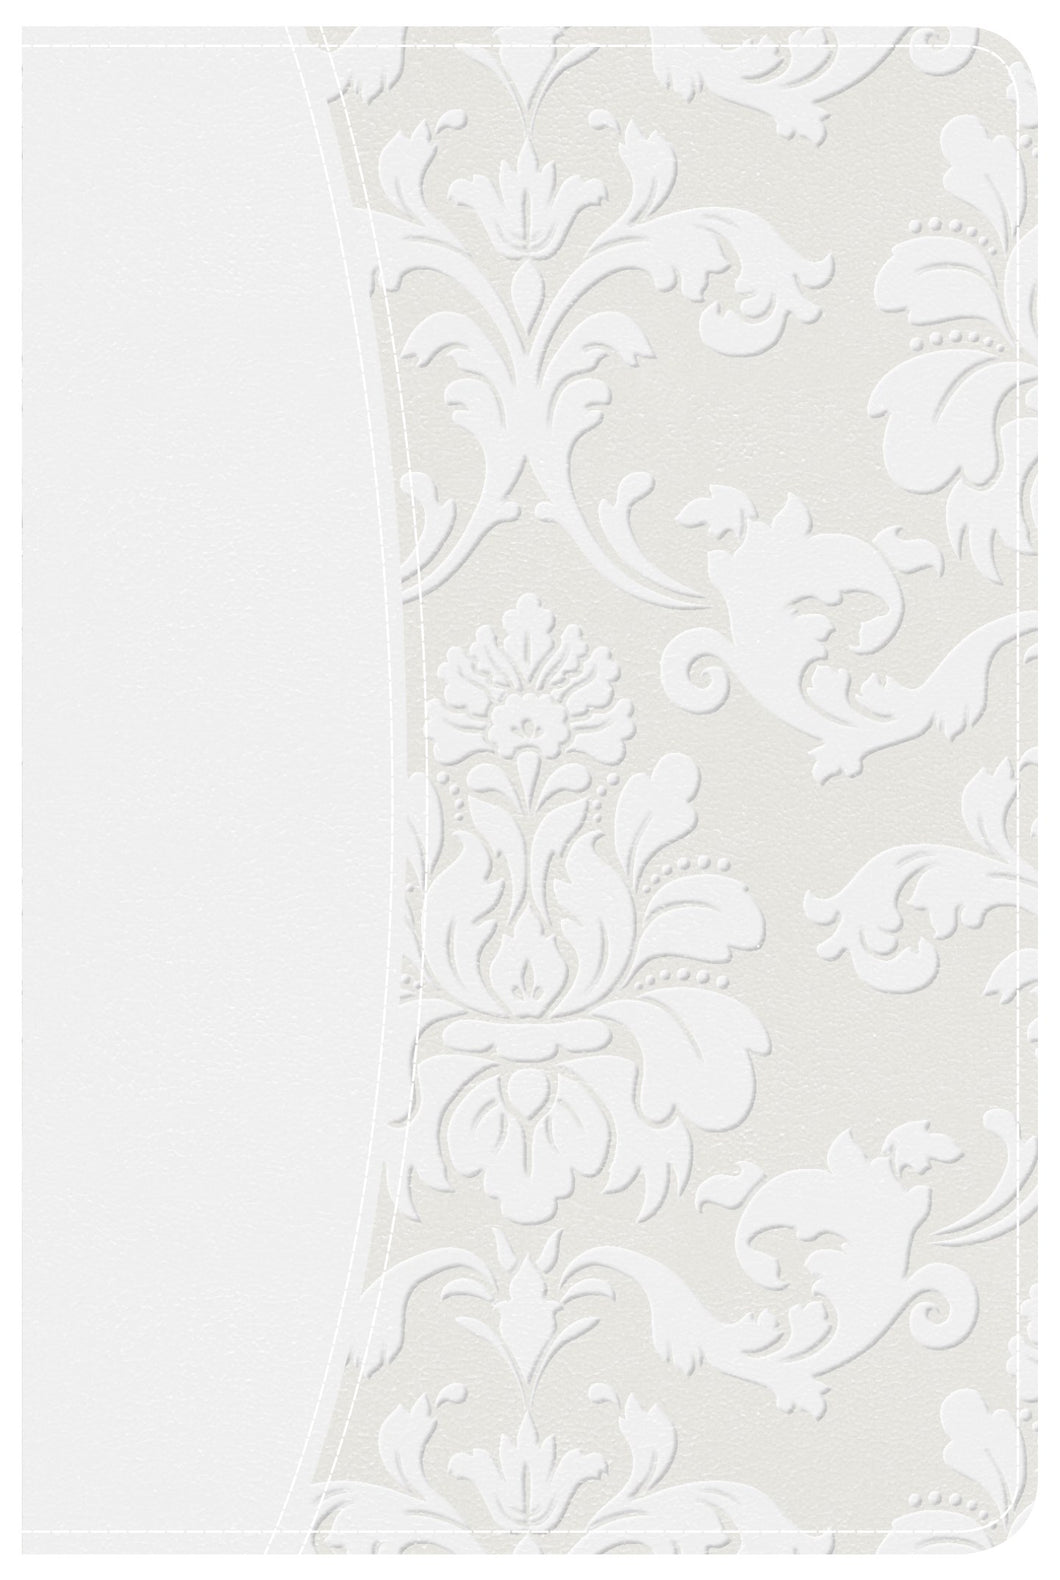 CSB Bride's Bible-White LeatherTouch